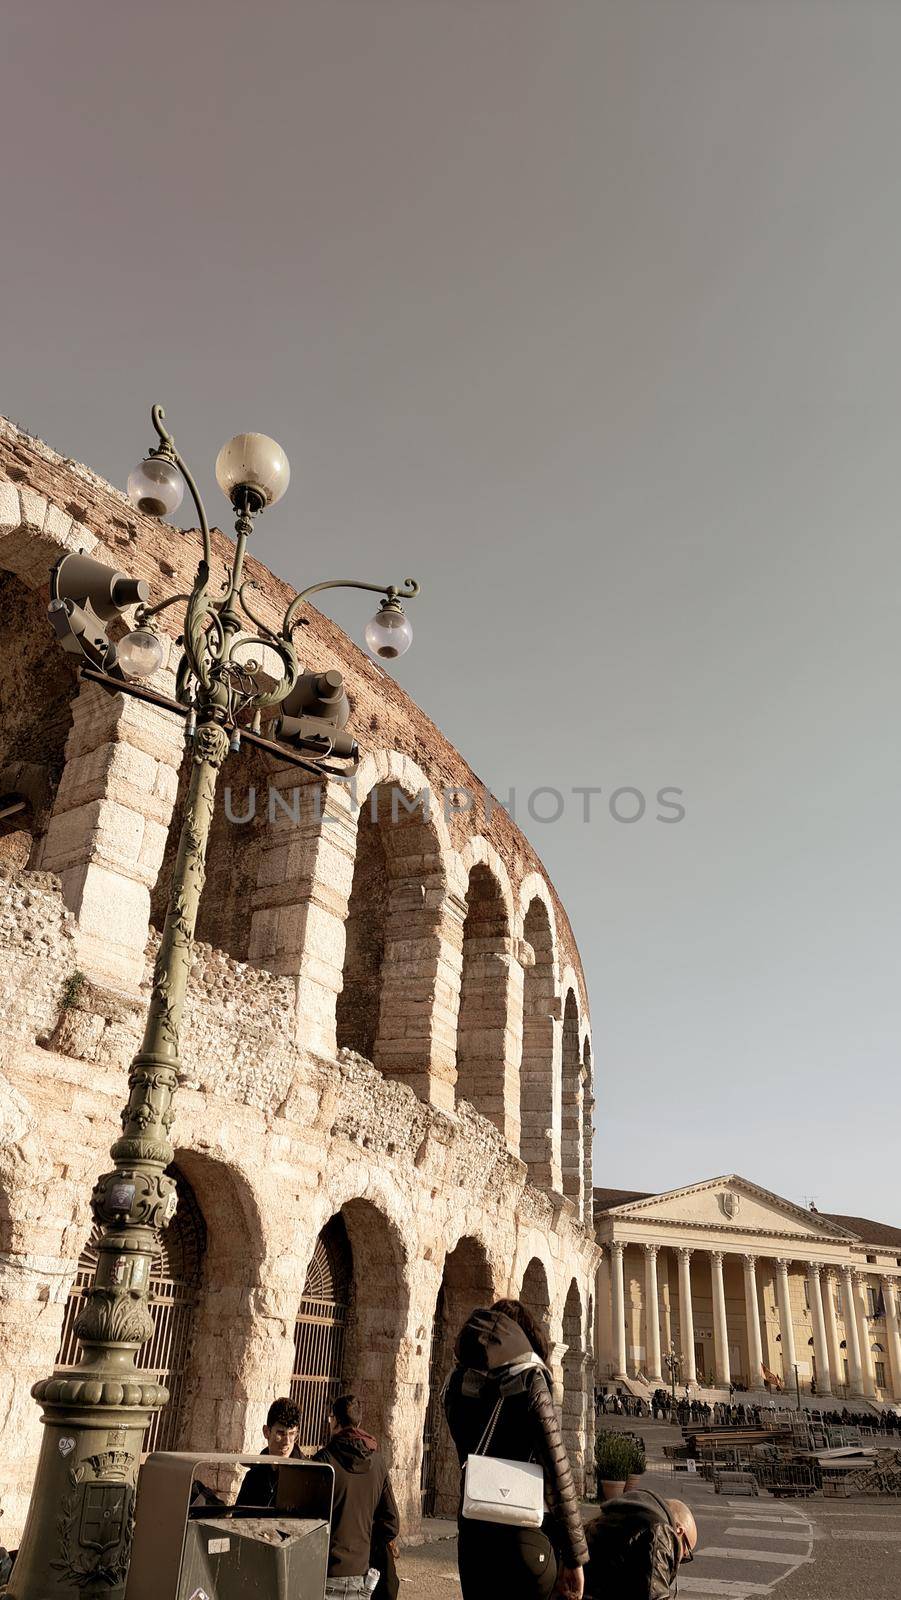 Verona, Italy-March 19, 2022: Beautifull old buildings of Verona. Typical architecture of the medieval period. Aerial view to the city with blue sky in the background. Detailed photography of the old architecture.